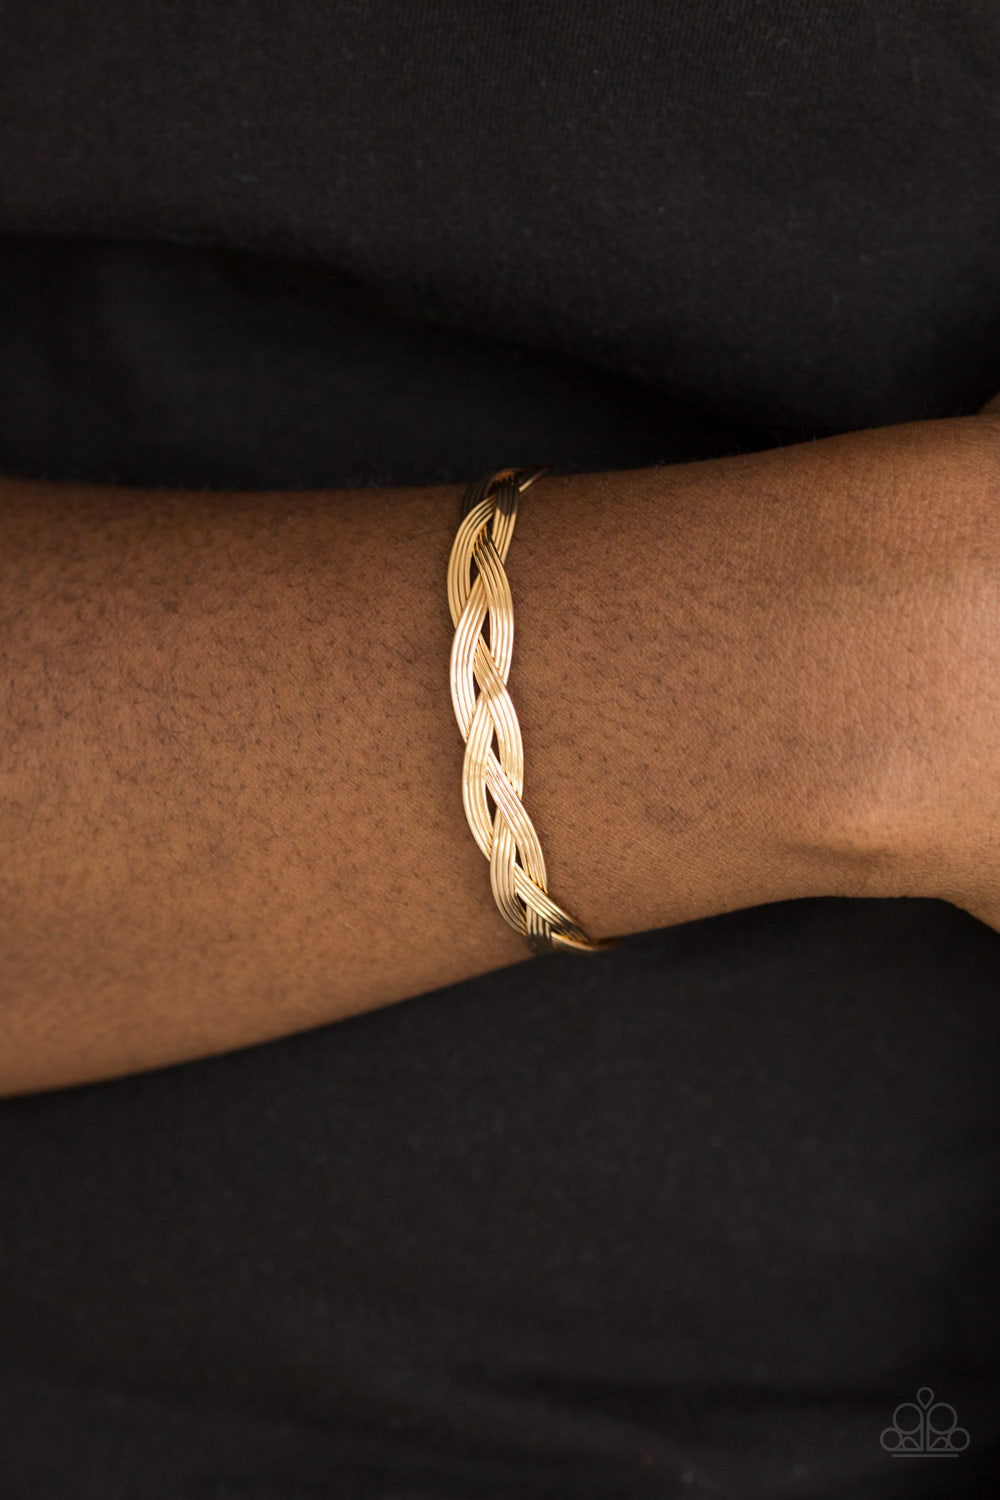 Business As Usual - Gold Cuff Bracelet - Paparazzi Accessories - Glistening gold wires braid across the wrist, coalescing into a dainty cuff. Sold as one individual bracelet.Perfect for any occasion or an everyday look. Shop the gold collection for matching accessories.